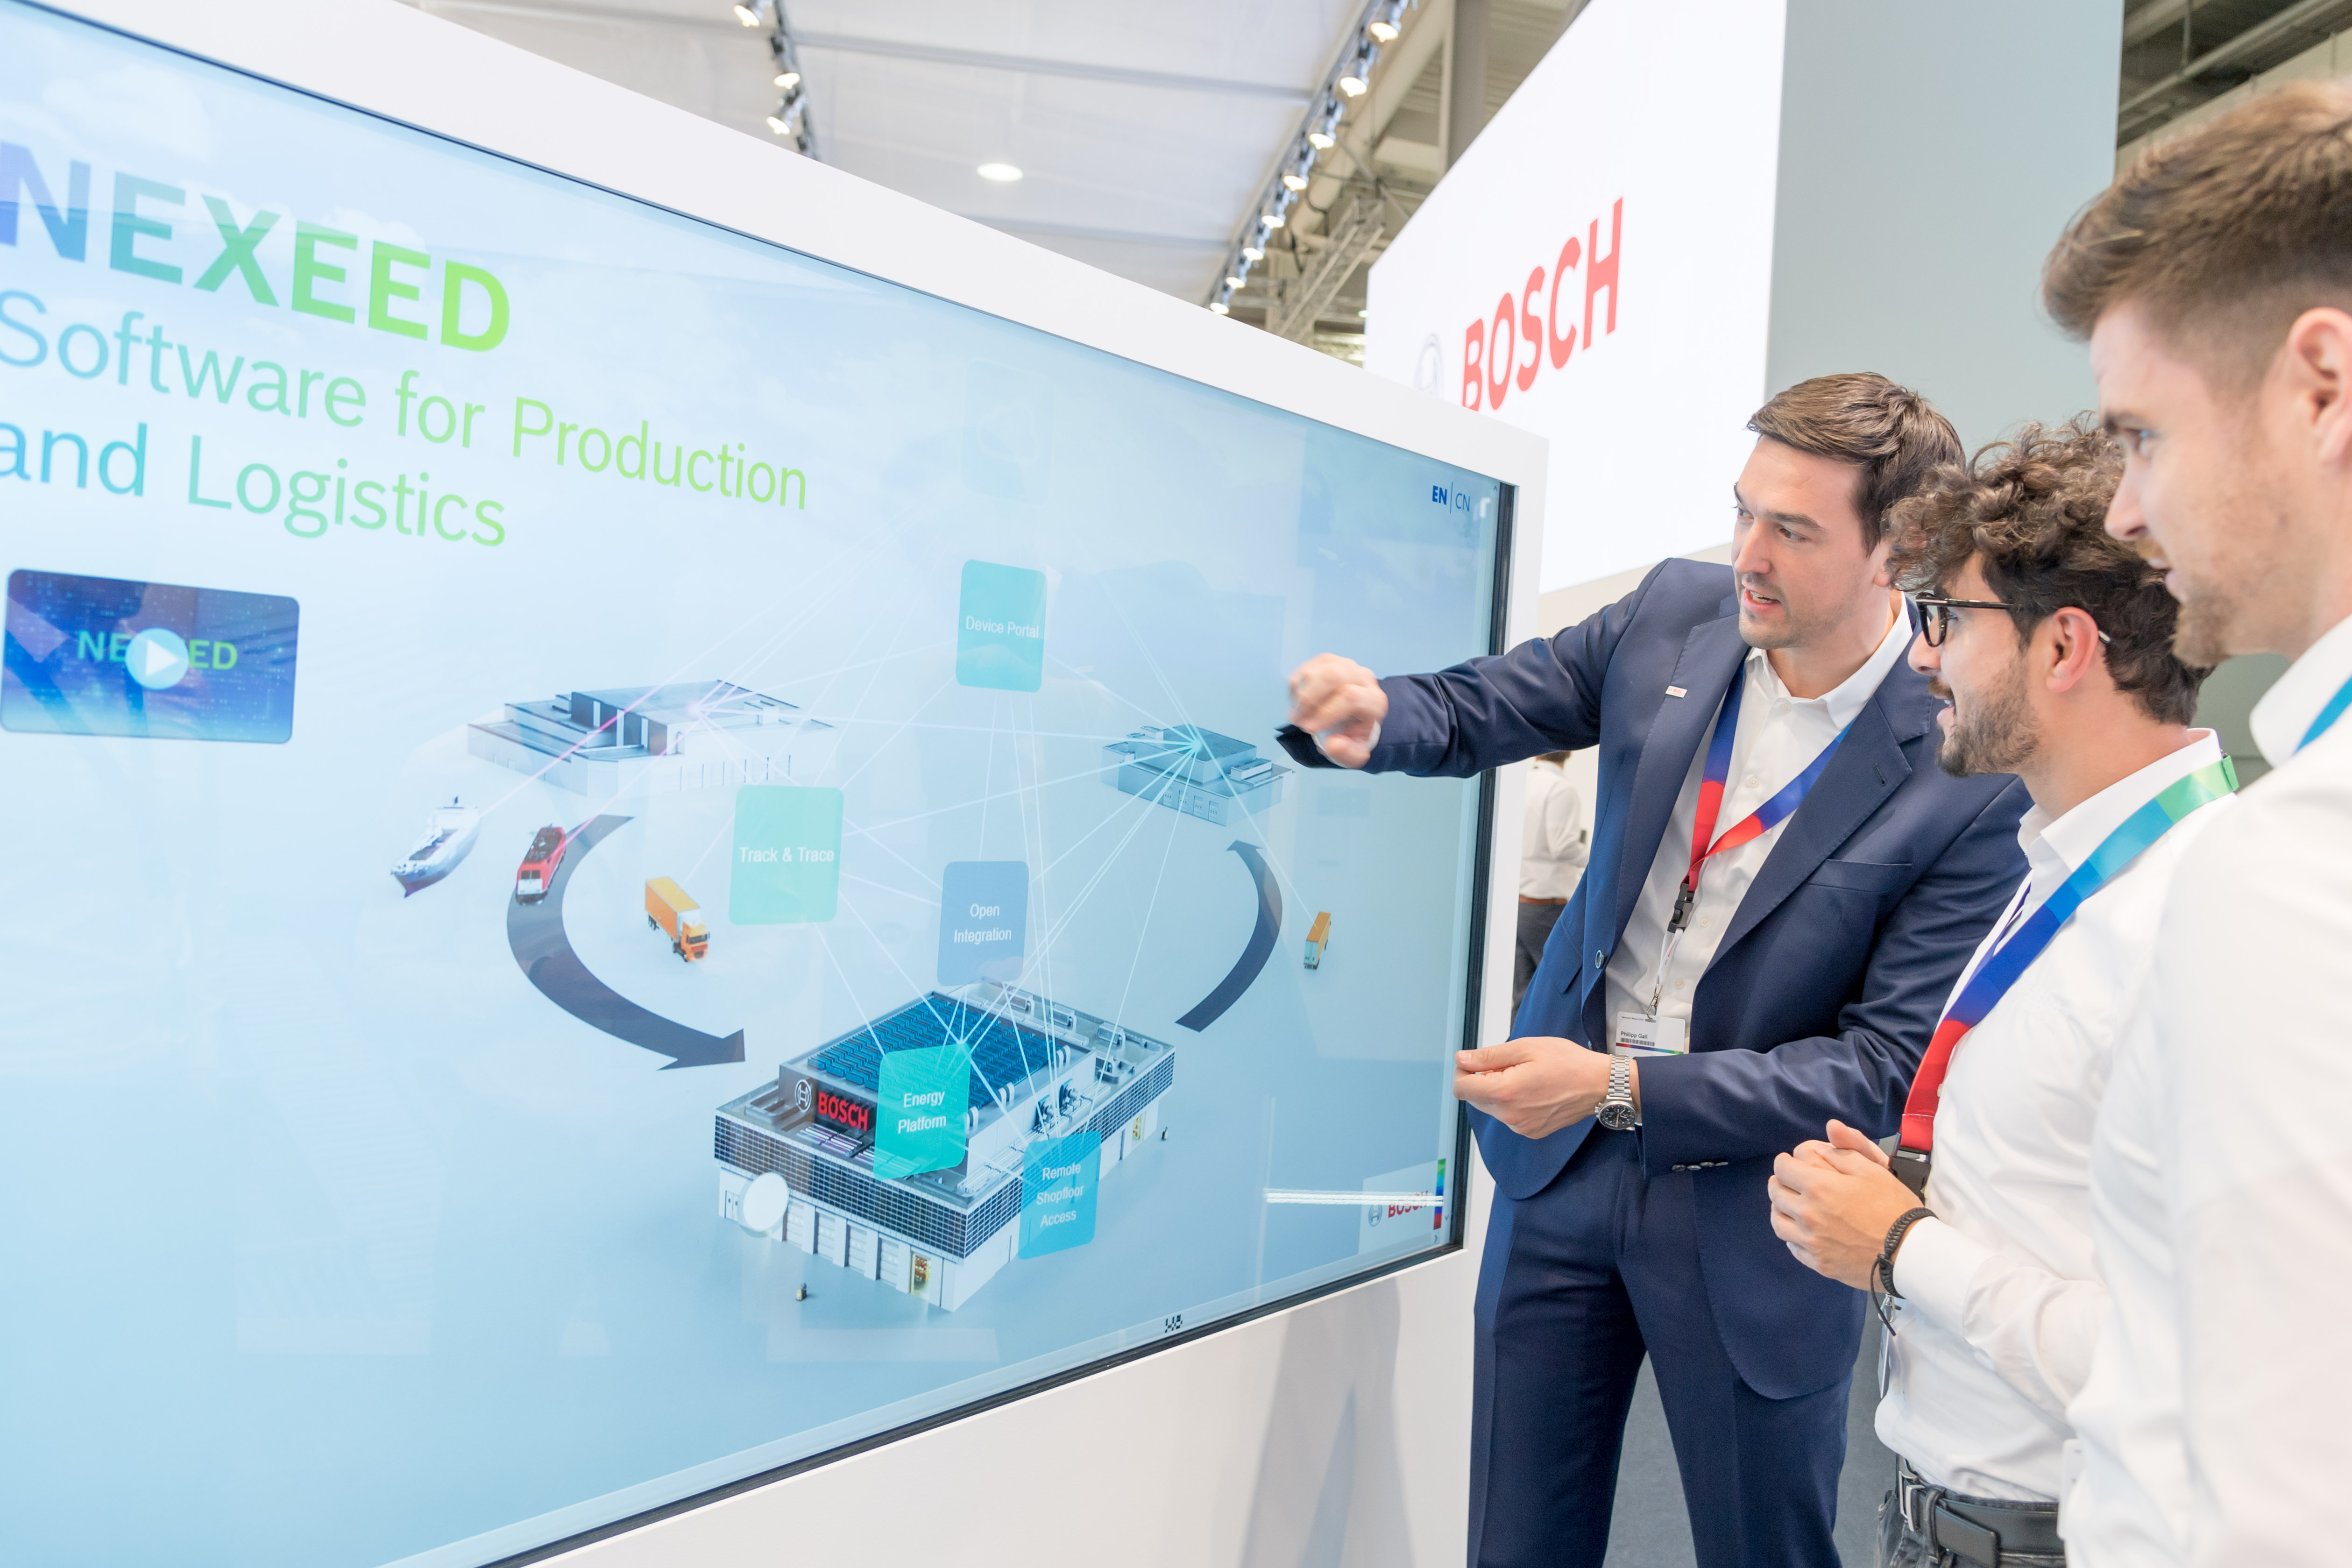 Bosch shows a comprehensive software portfolio for production and logistics (Nexeed) at the Hannover Messe 2019.